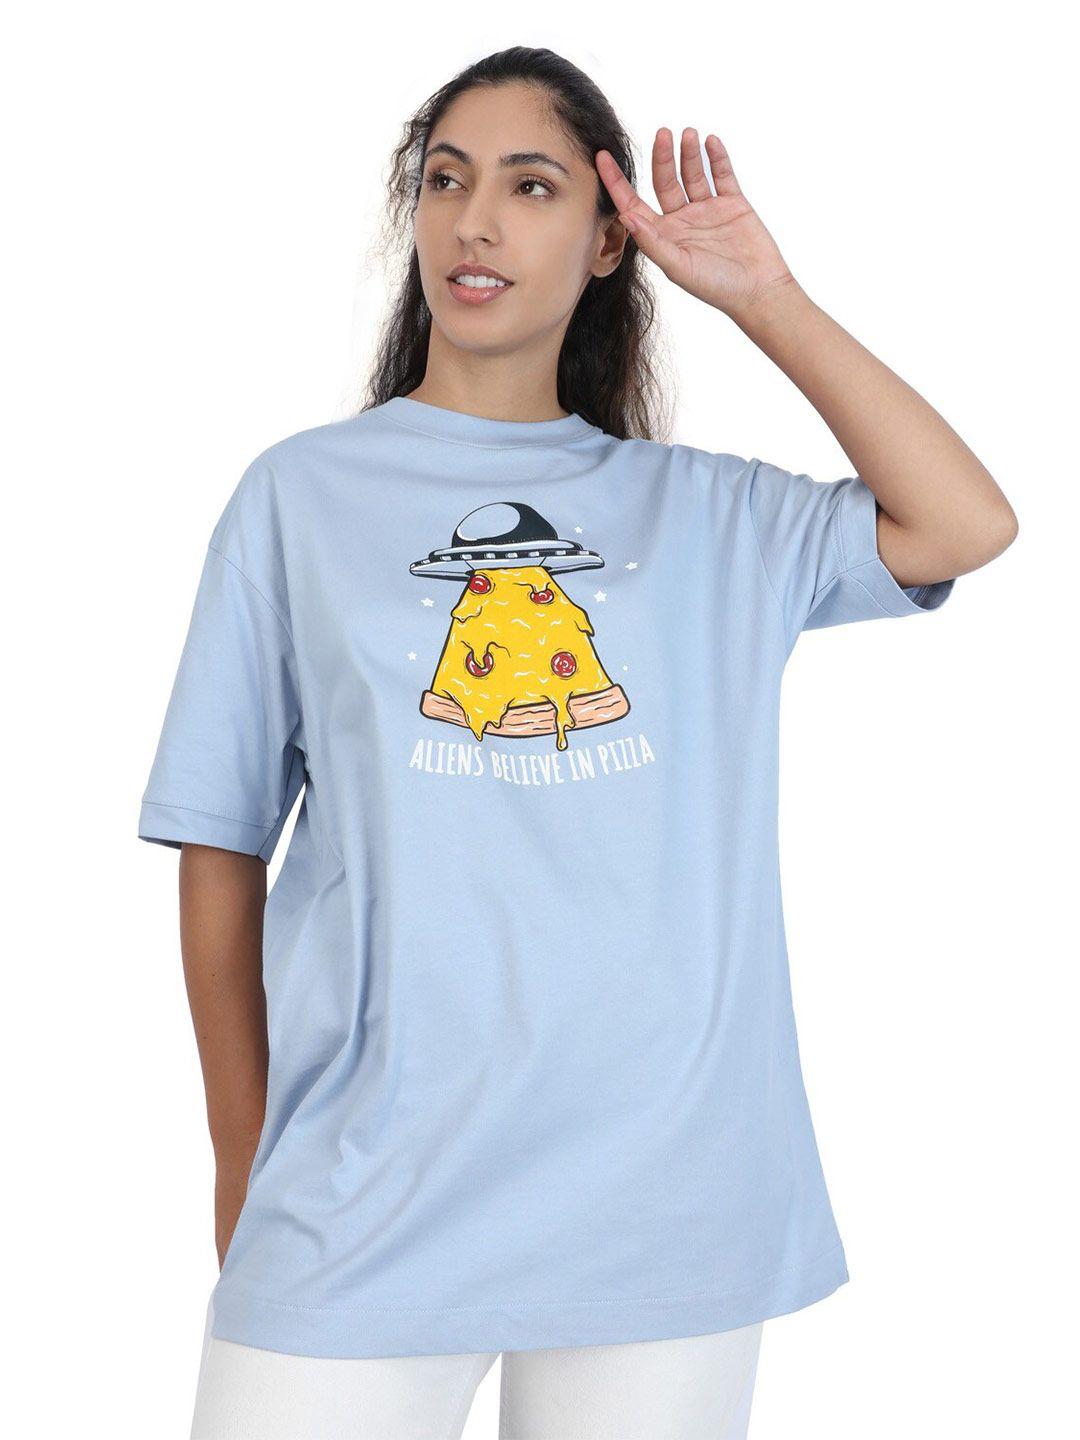 zu humour and comic printed cotton oversized t-shirt